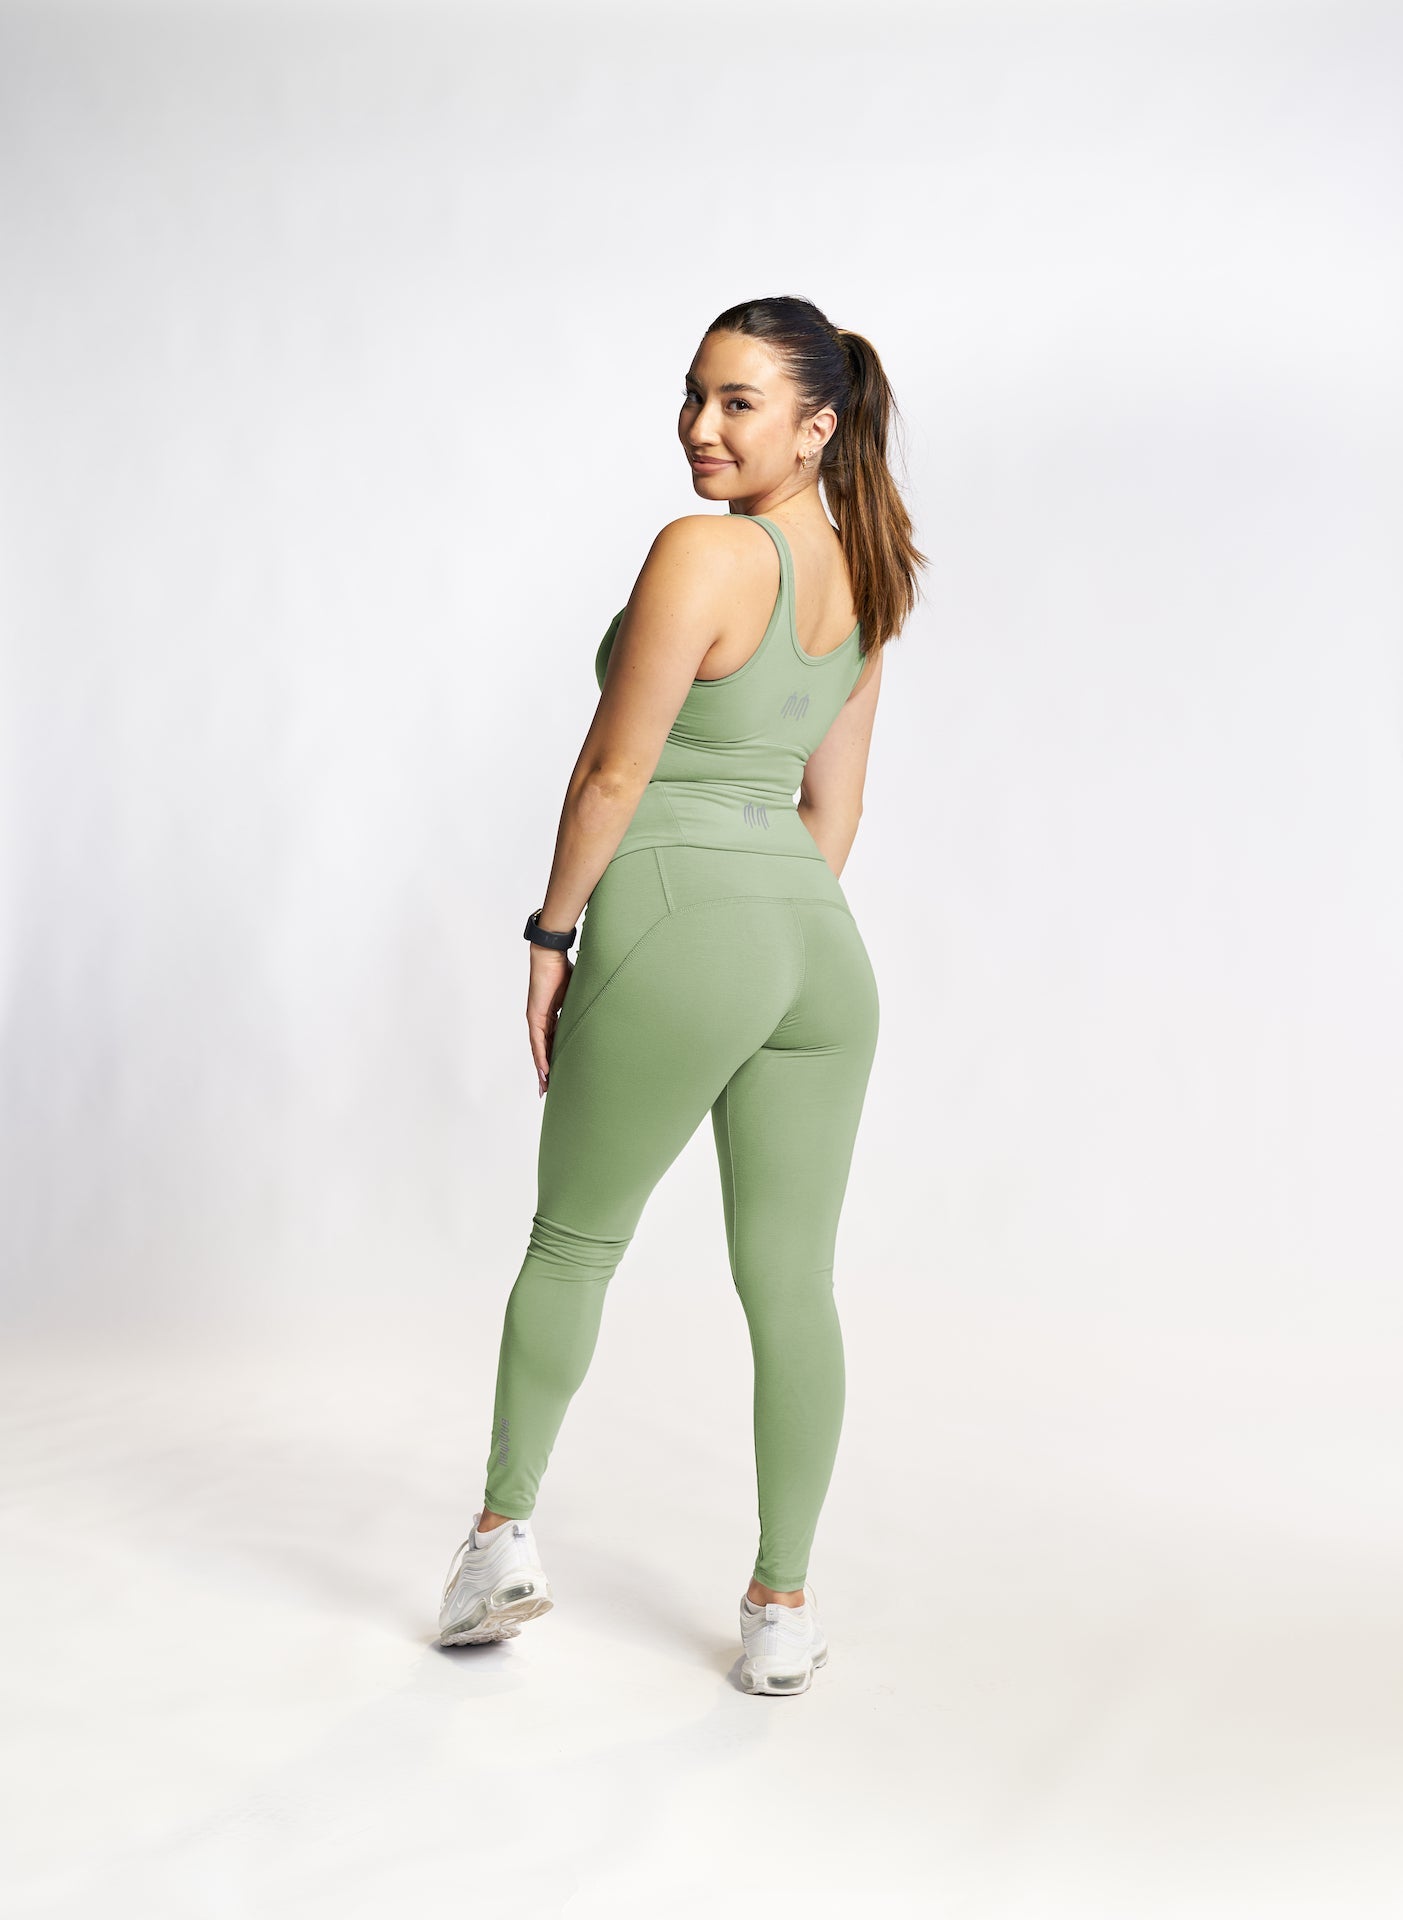 sage green bamboo leggings.  comfortable and stylish bamboo performance leggings, for working out or casual wear